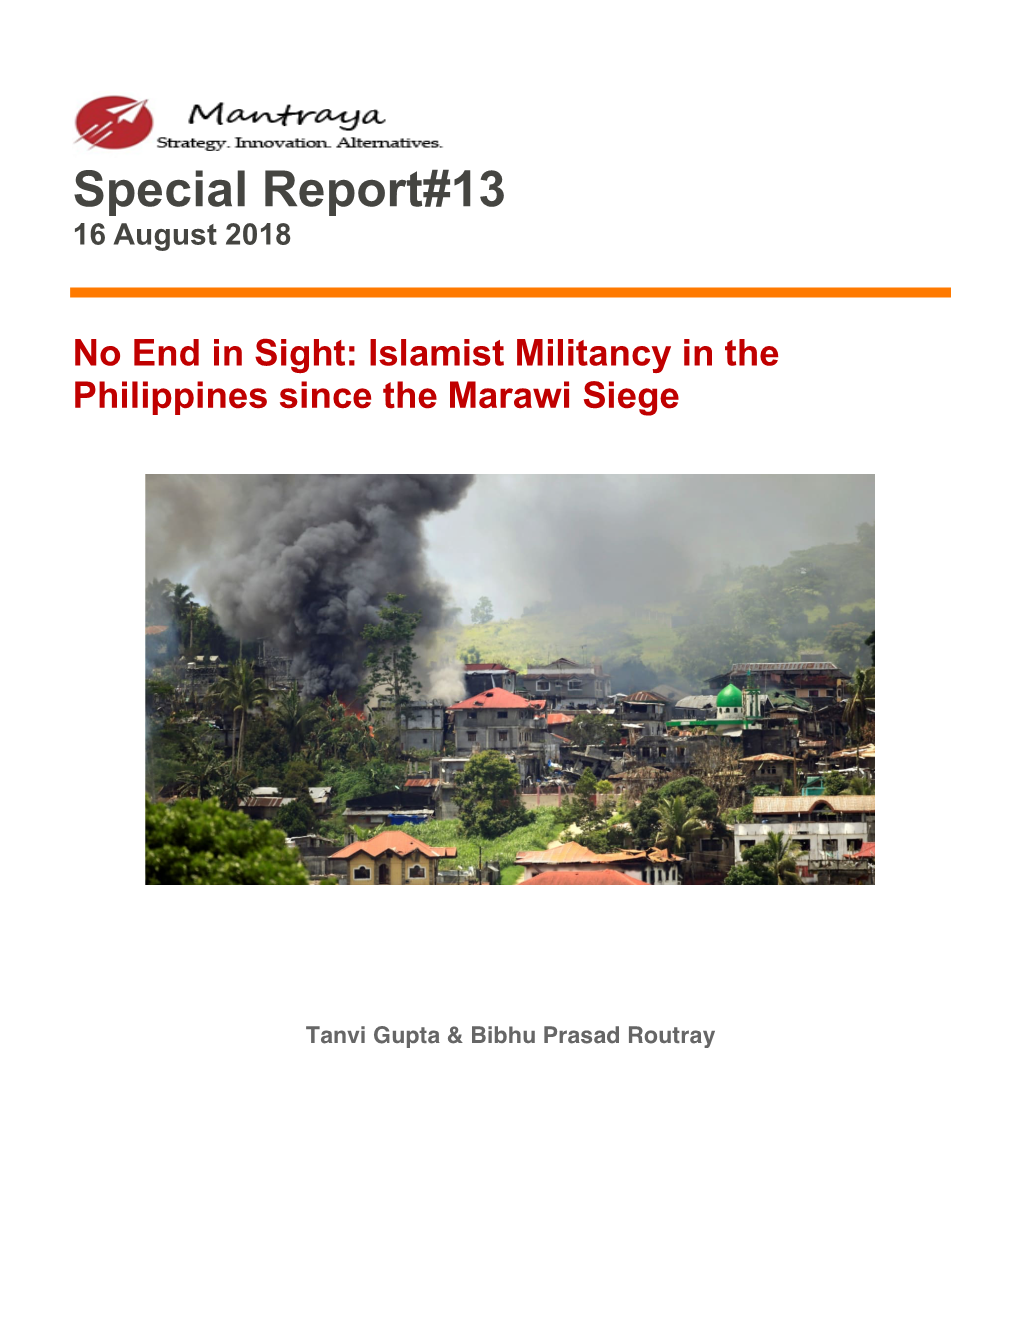 No End in Sight Islamist Militancy in the Philippines Since The